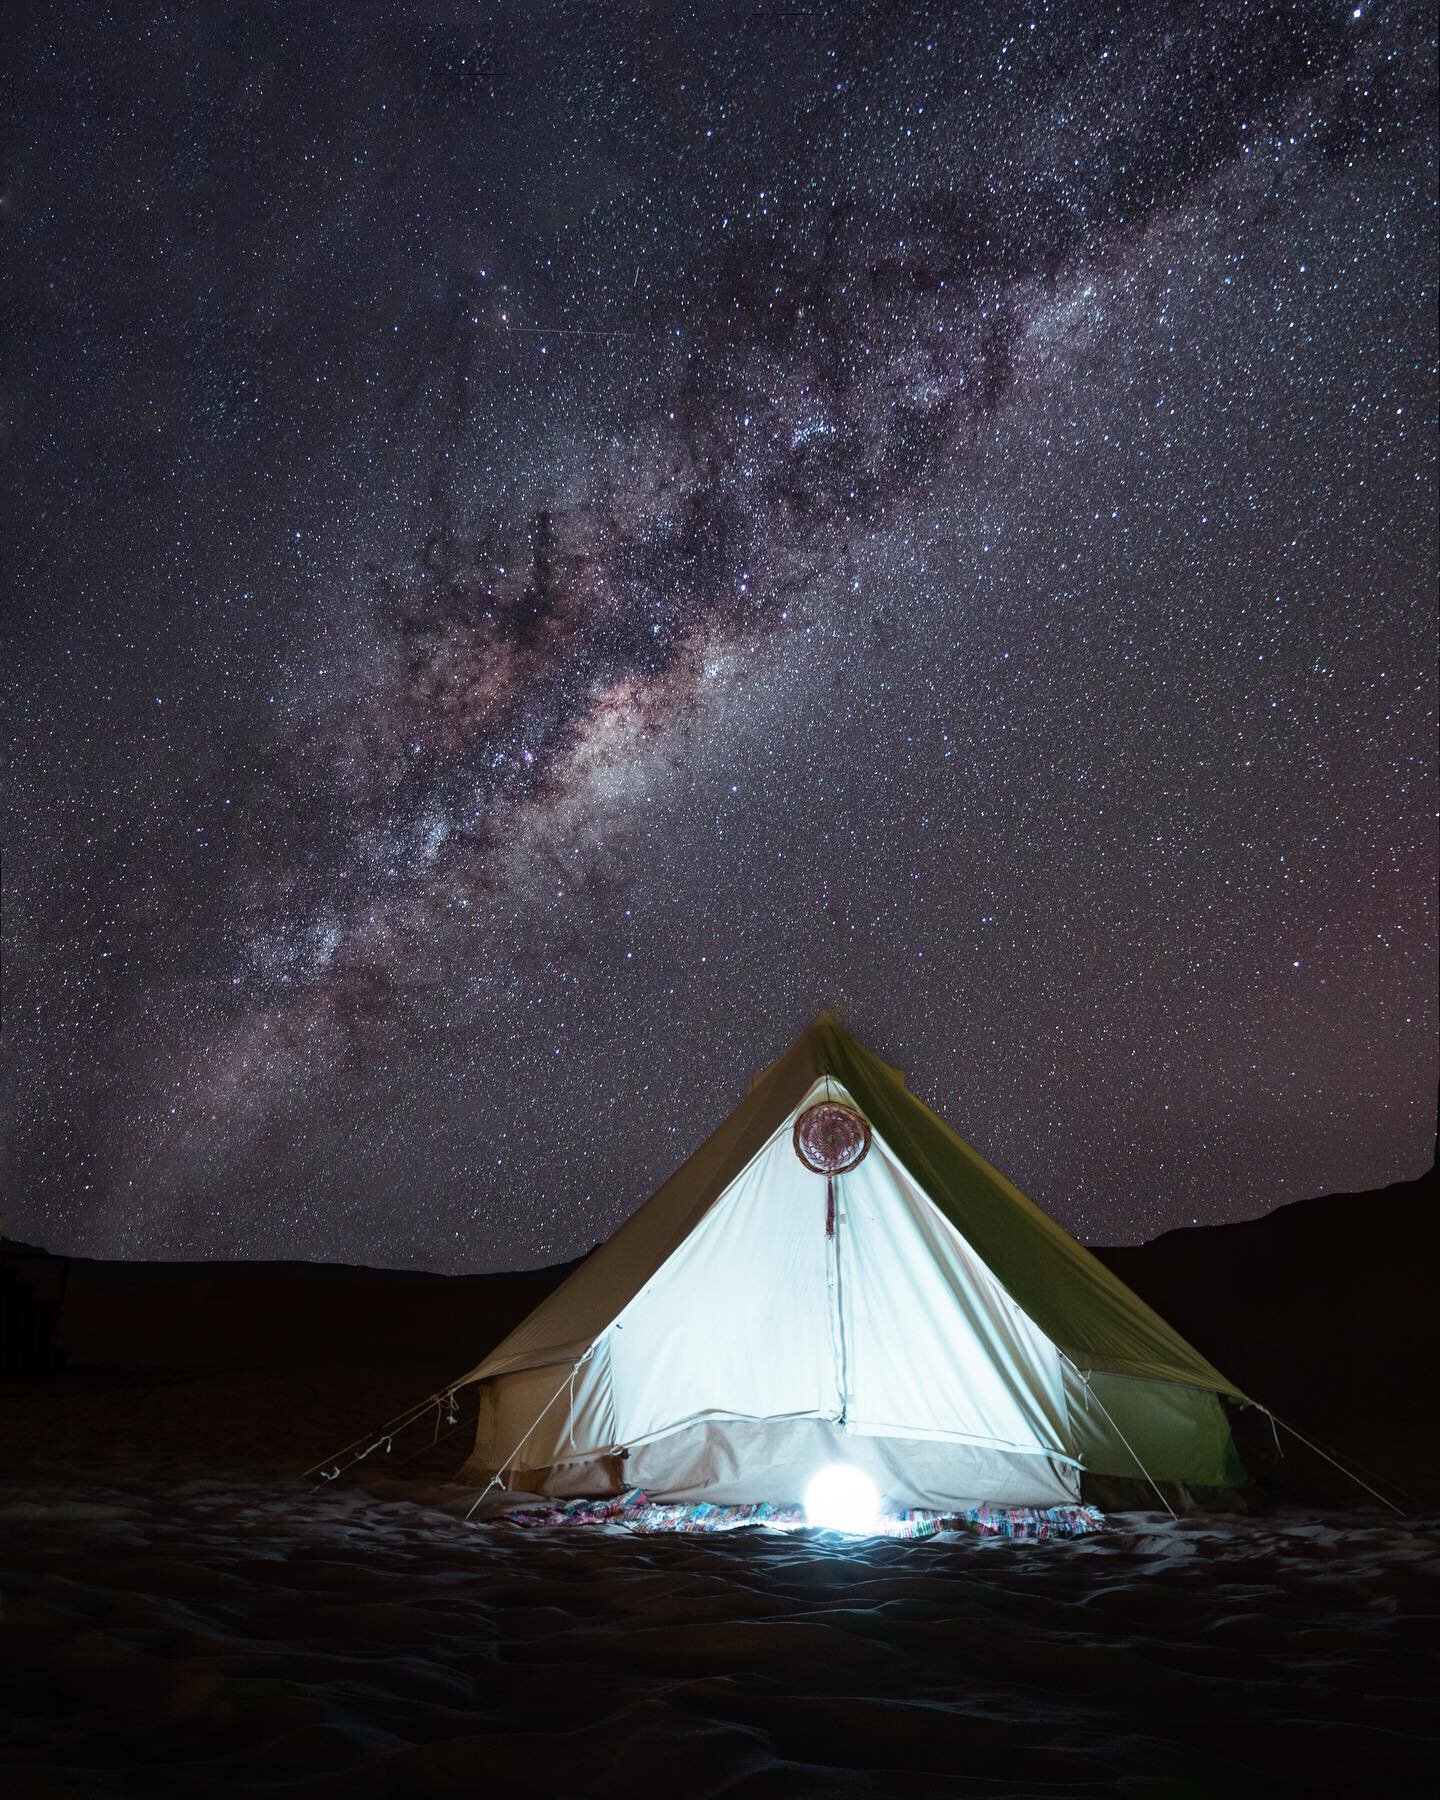 ⛺️ Camping in the Peruvian desert

Is there any better place to spend the night than under a sky full of stars? ✨

#nightsky #desertvibes #desertnights #milkywaygalaxy #camping⛺️ #visitperu #peruviandesert #campingadventures #travelperu #grouptour #g